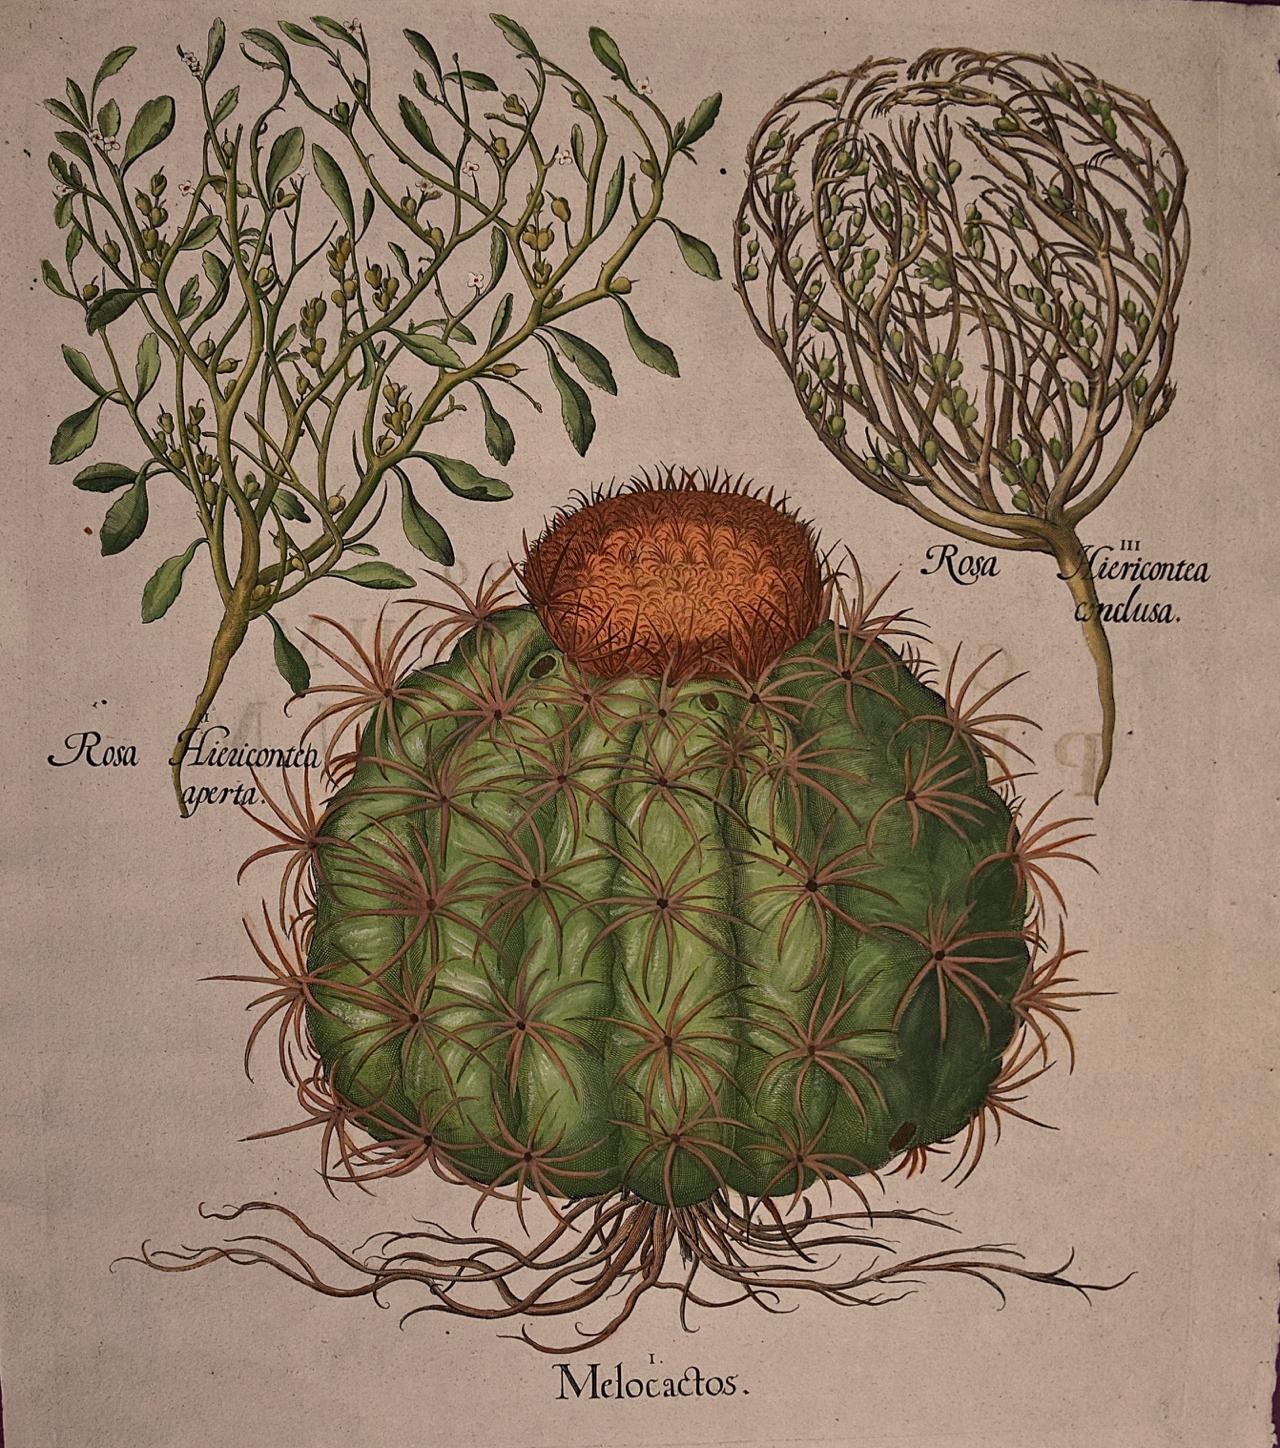 Cactus & Rose of Jericho Plants: A Besler Hand-colored Botanical Engraving 